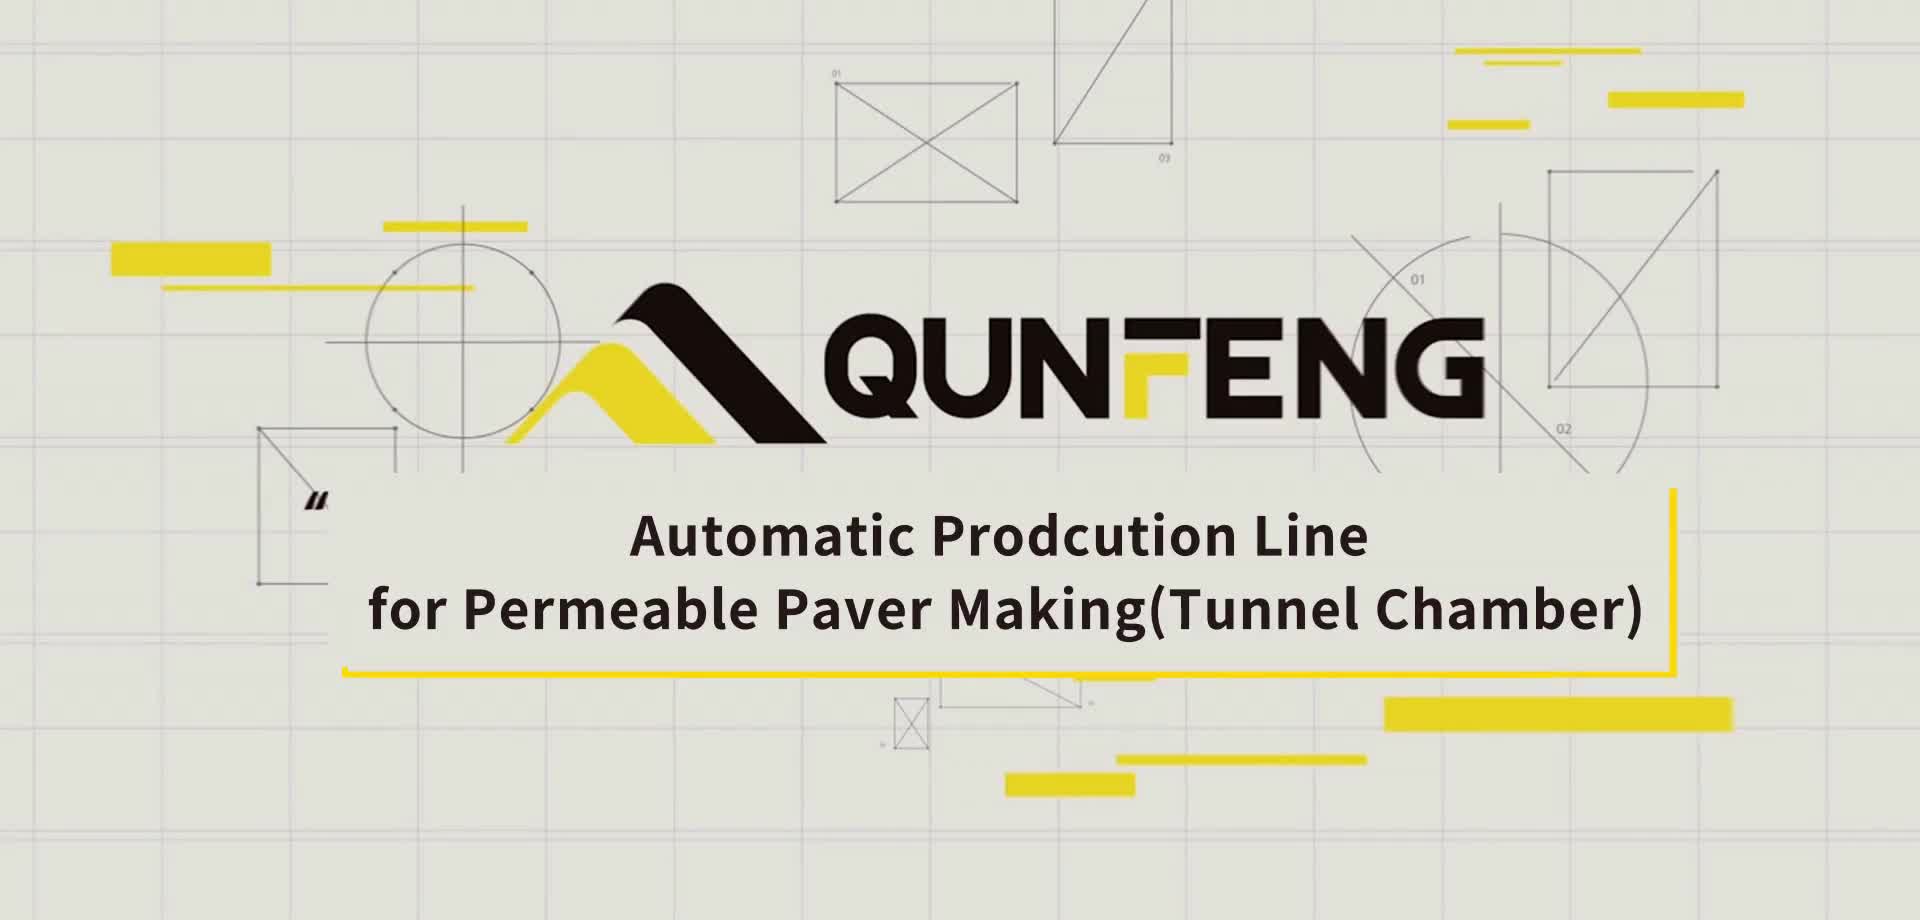 Automatic Prodcution Line for Permeable Paver Making(Tunnel Chamber)